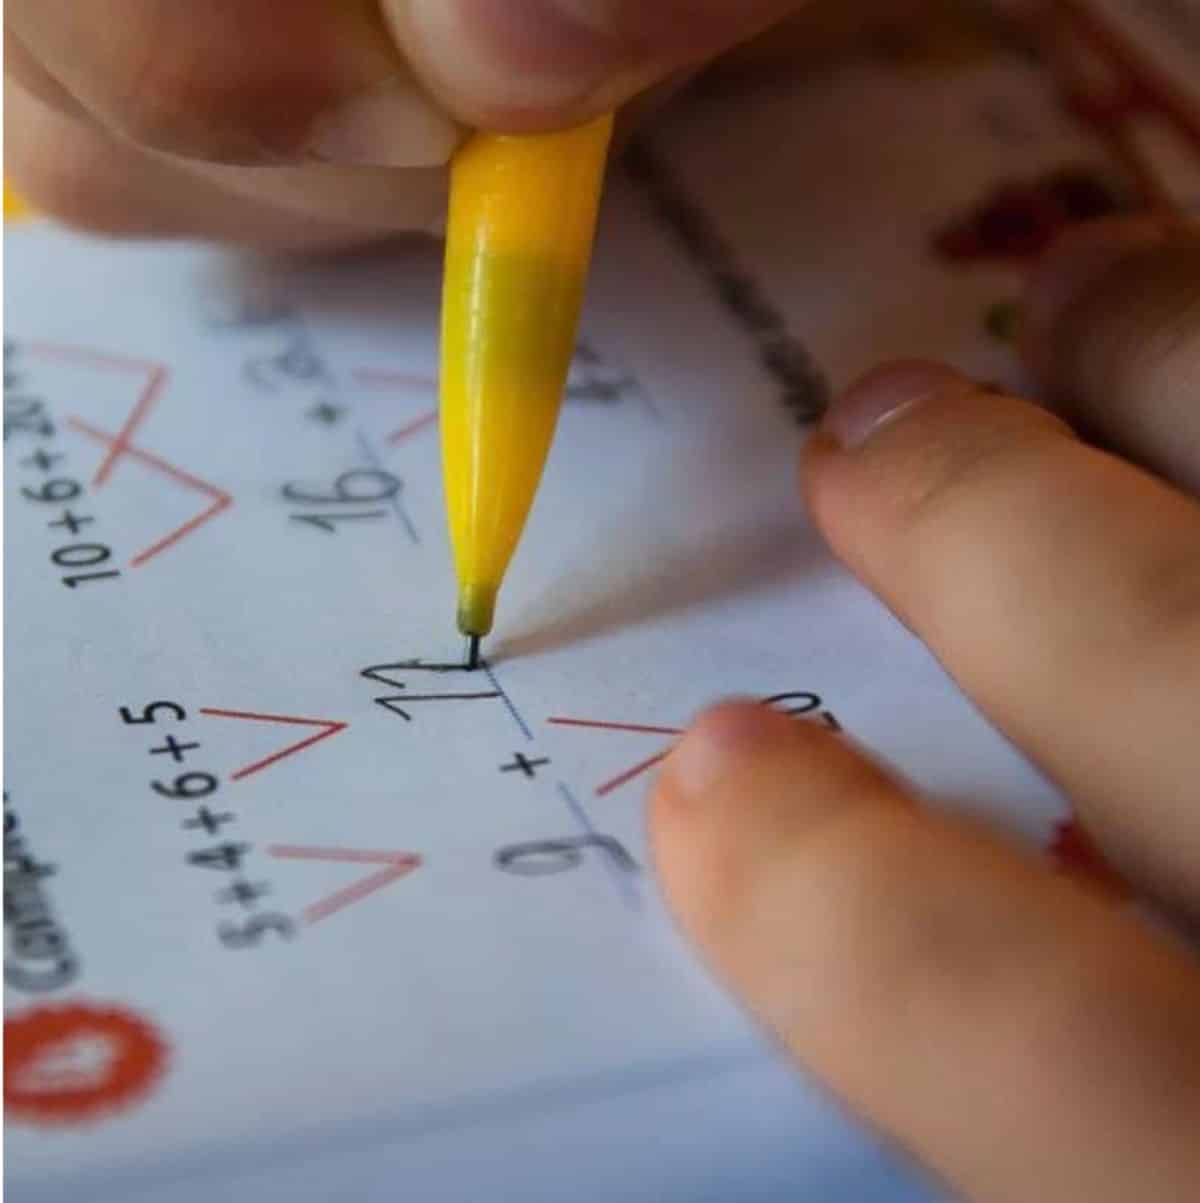 Kid with yellow pen writing number on a sheet.